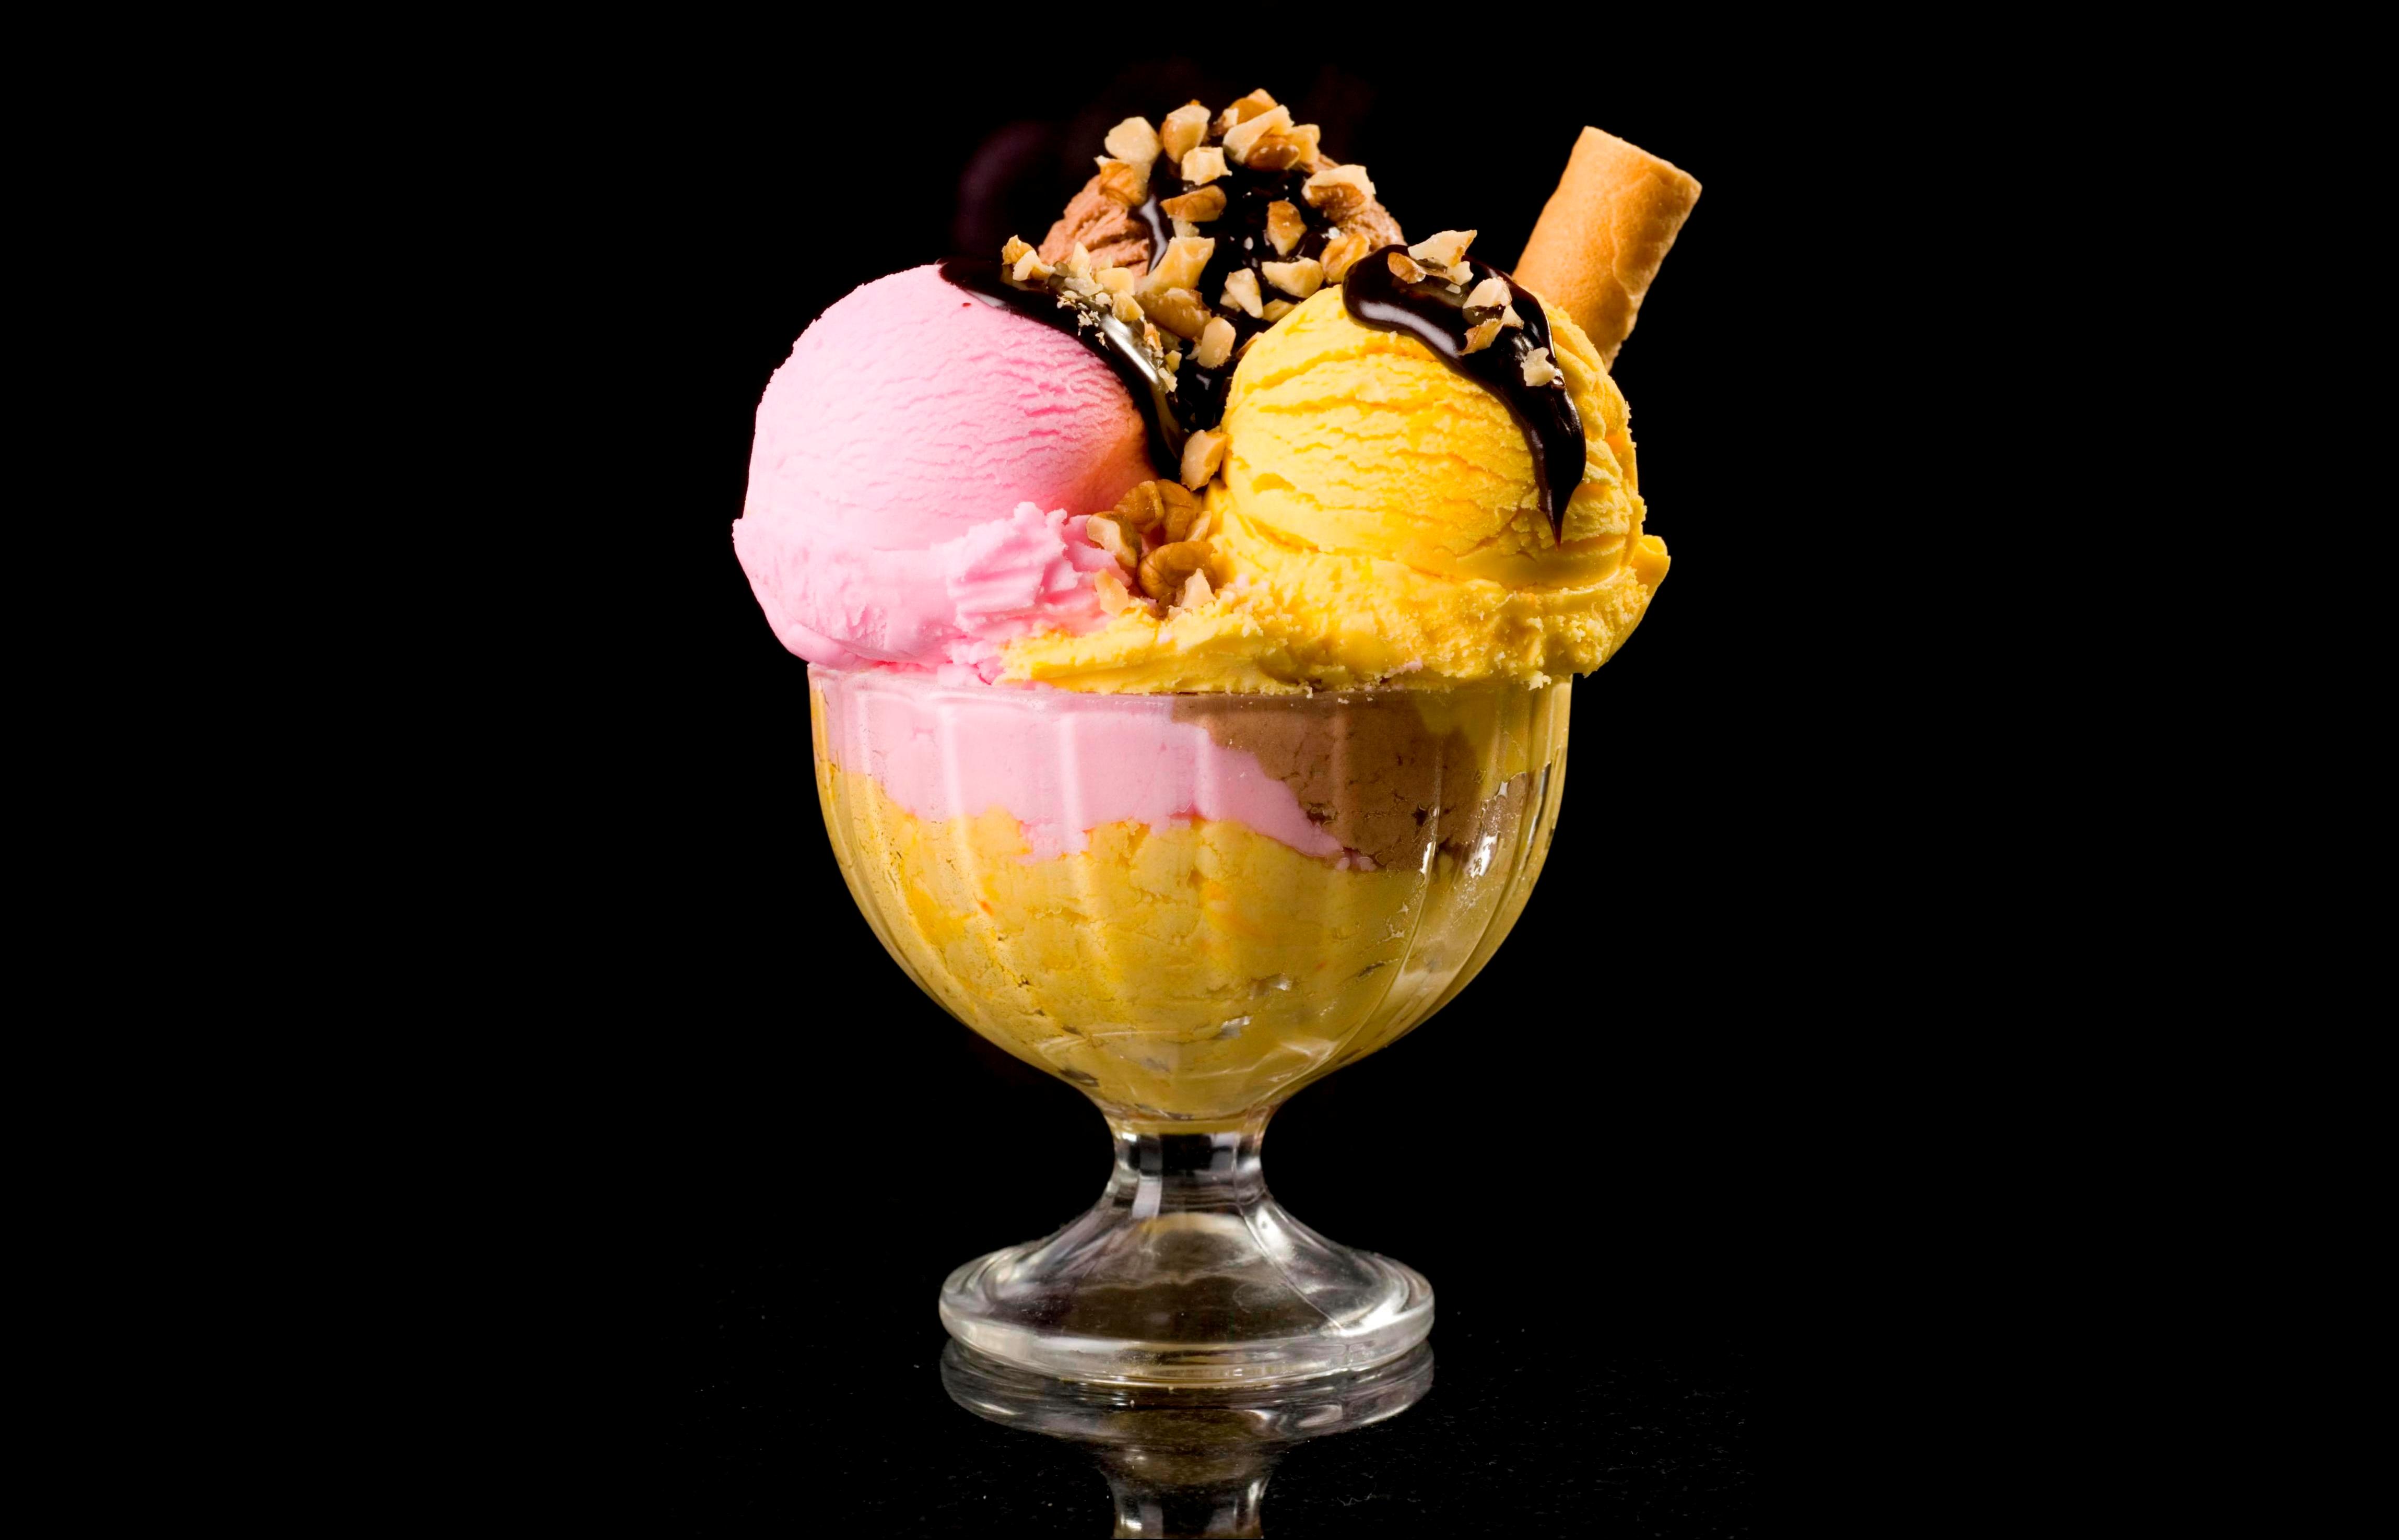 Balls Of Fruit Ice Cream In A Bowl With Nuts And Chocolate On